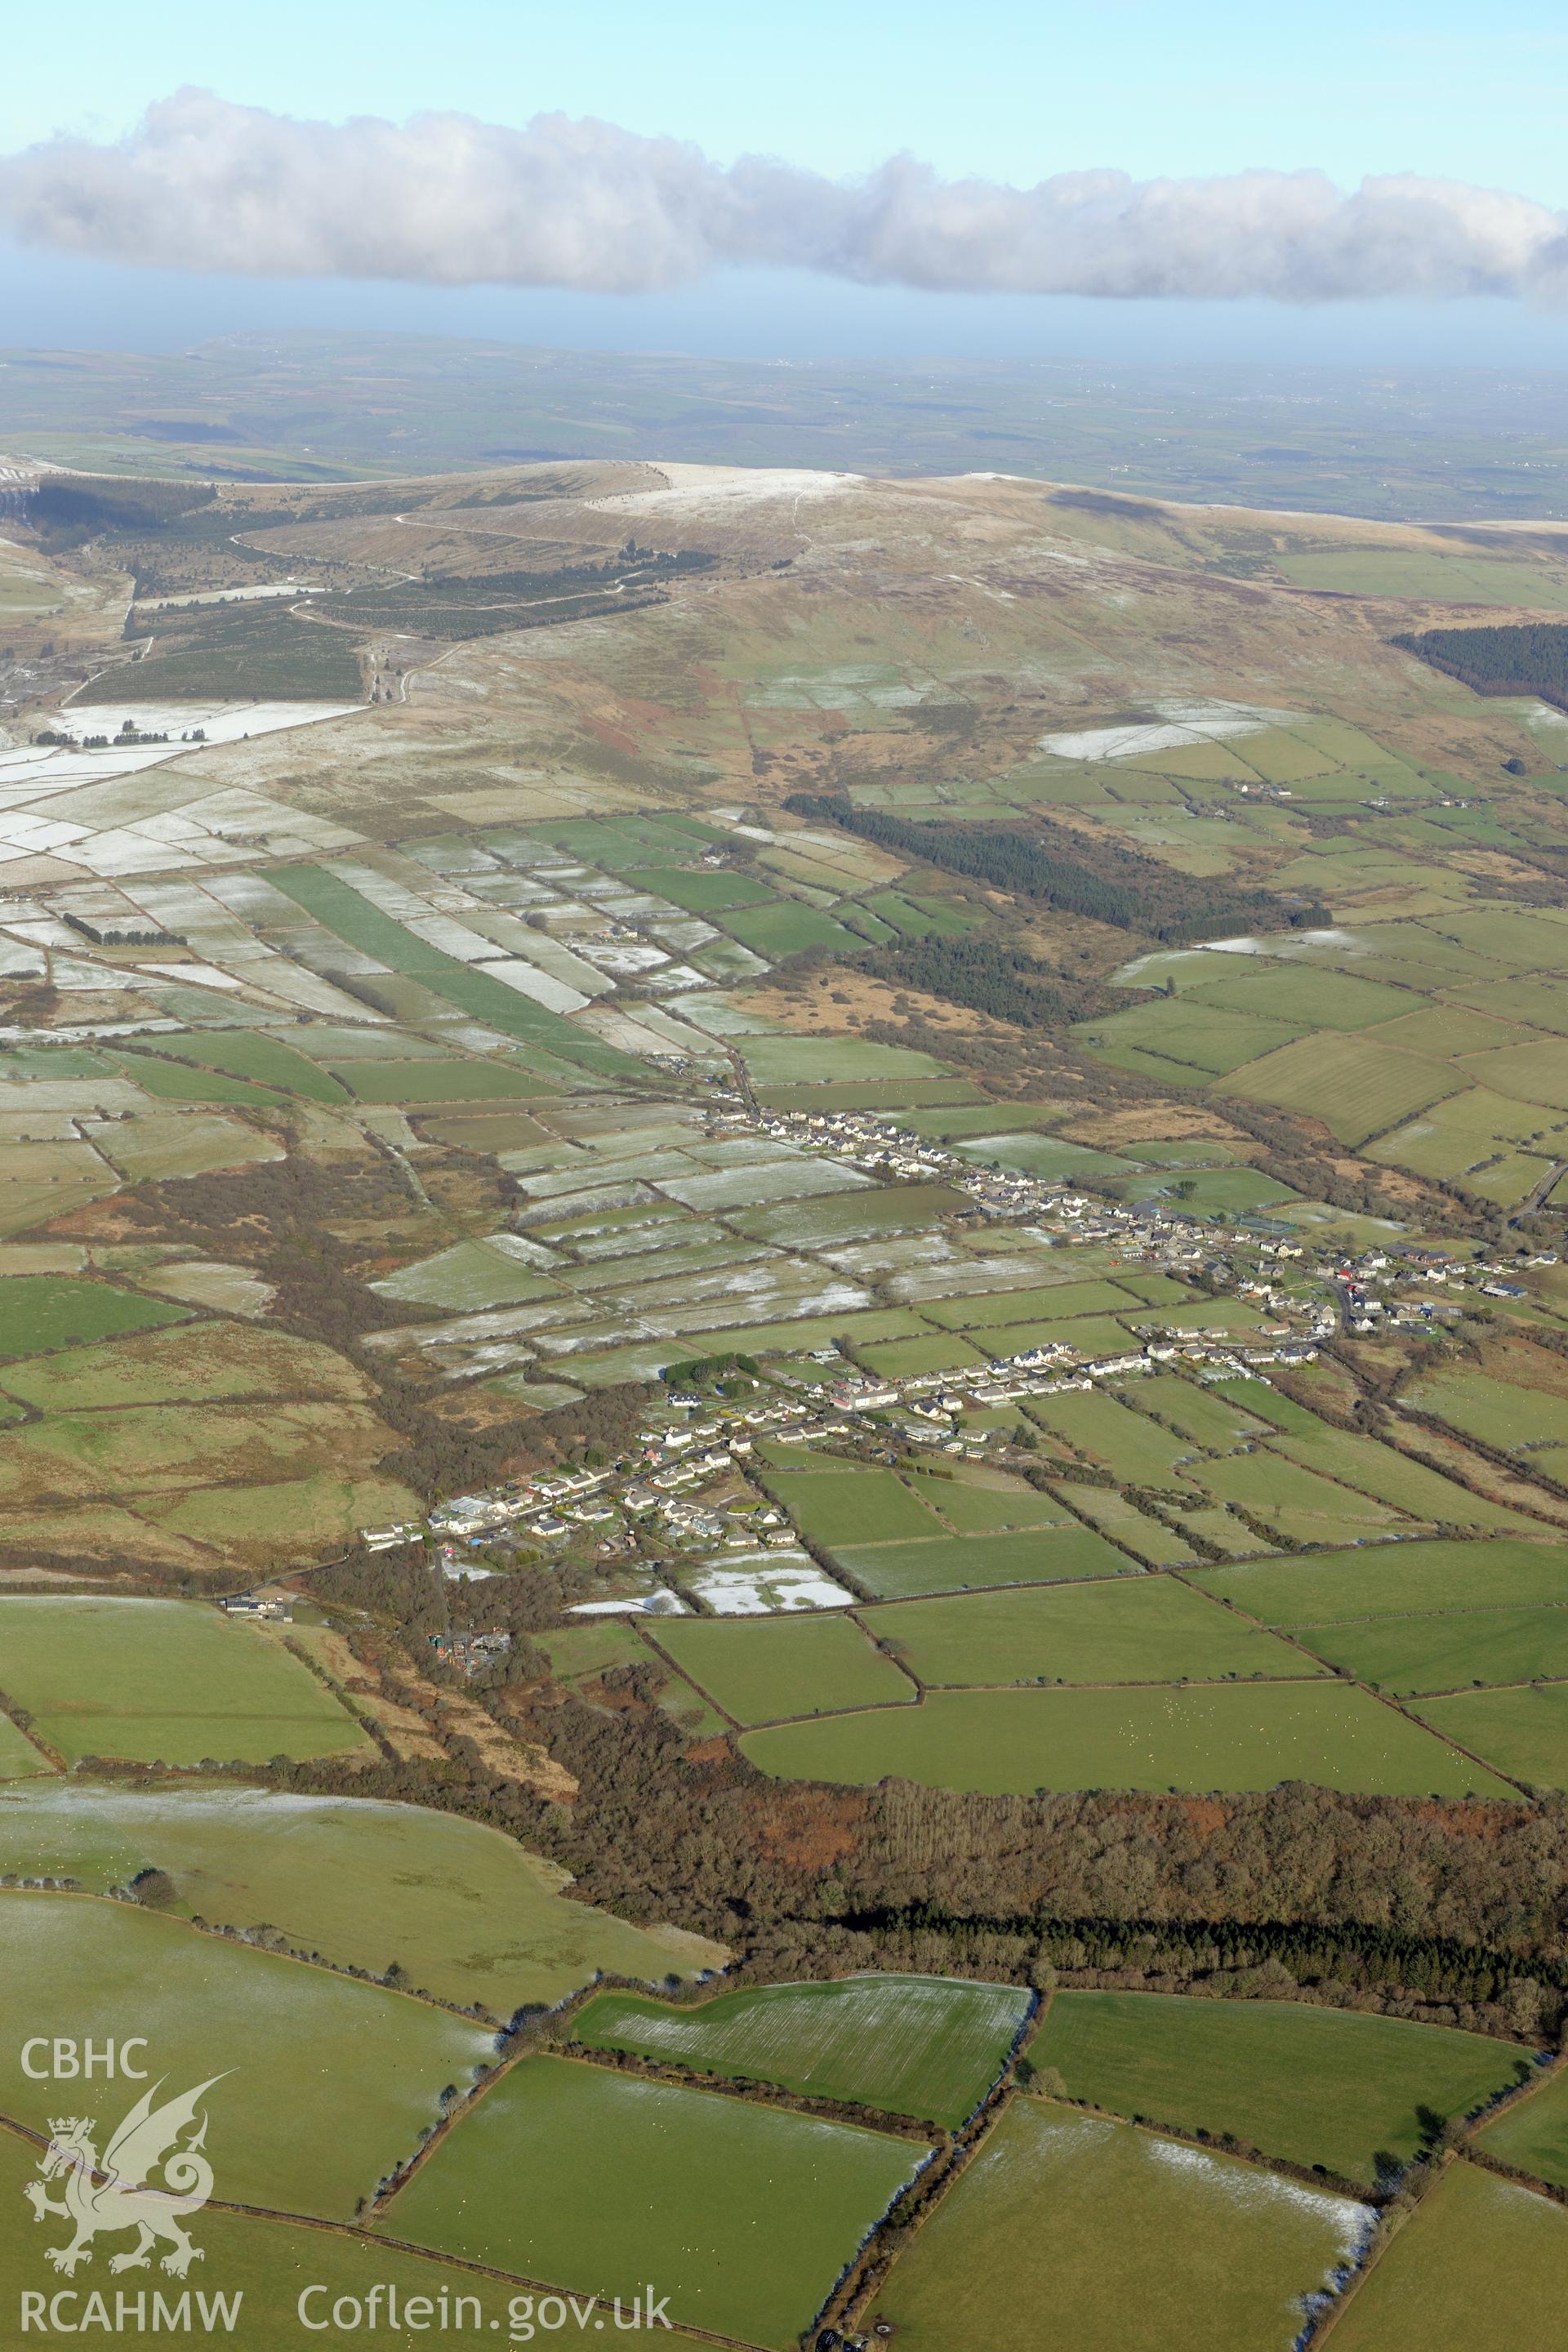 View of the village of Maenclochog from the south. Oblique aerial photograph taken during the Royal Commission's programme of archaeological aerial reconnaissance by Toby Driver on 4th February 2015.